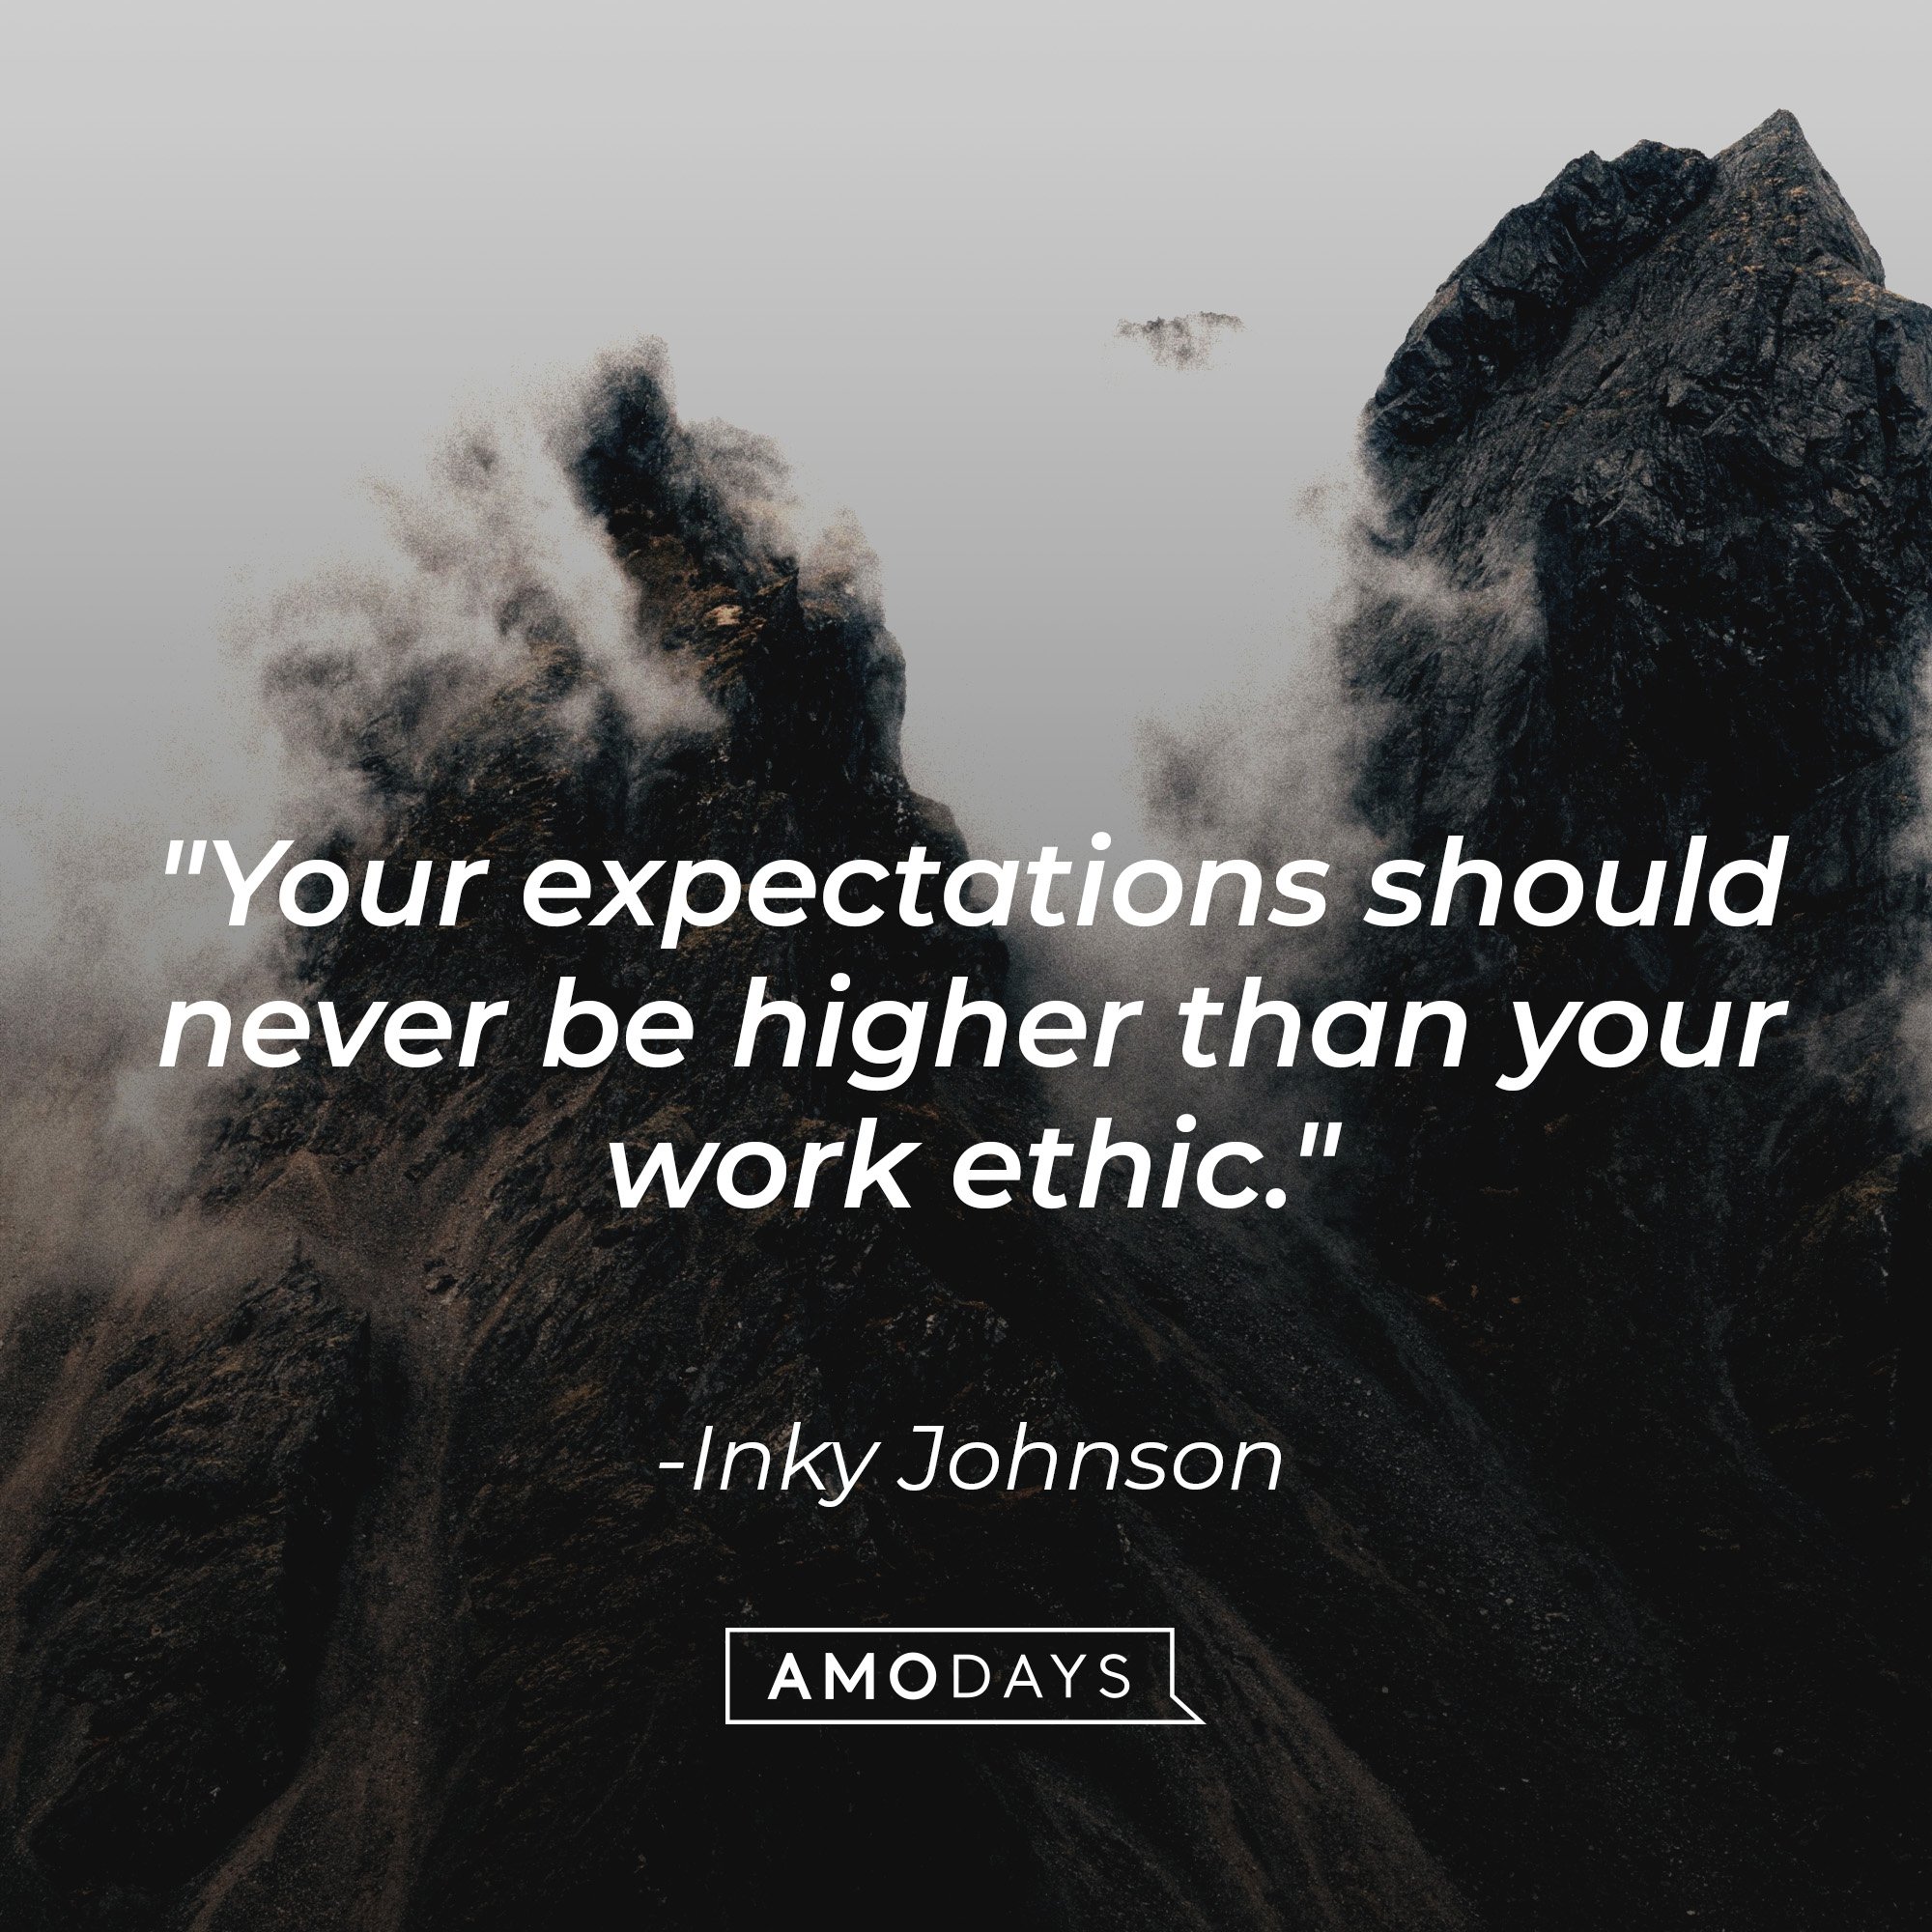 Inky Johnson's quote: "Your expectations should never be higher than your work ethic." | Image: AmoDays